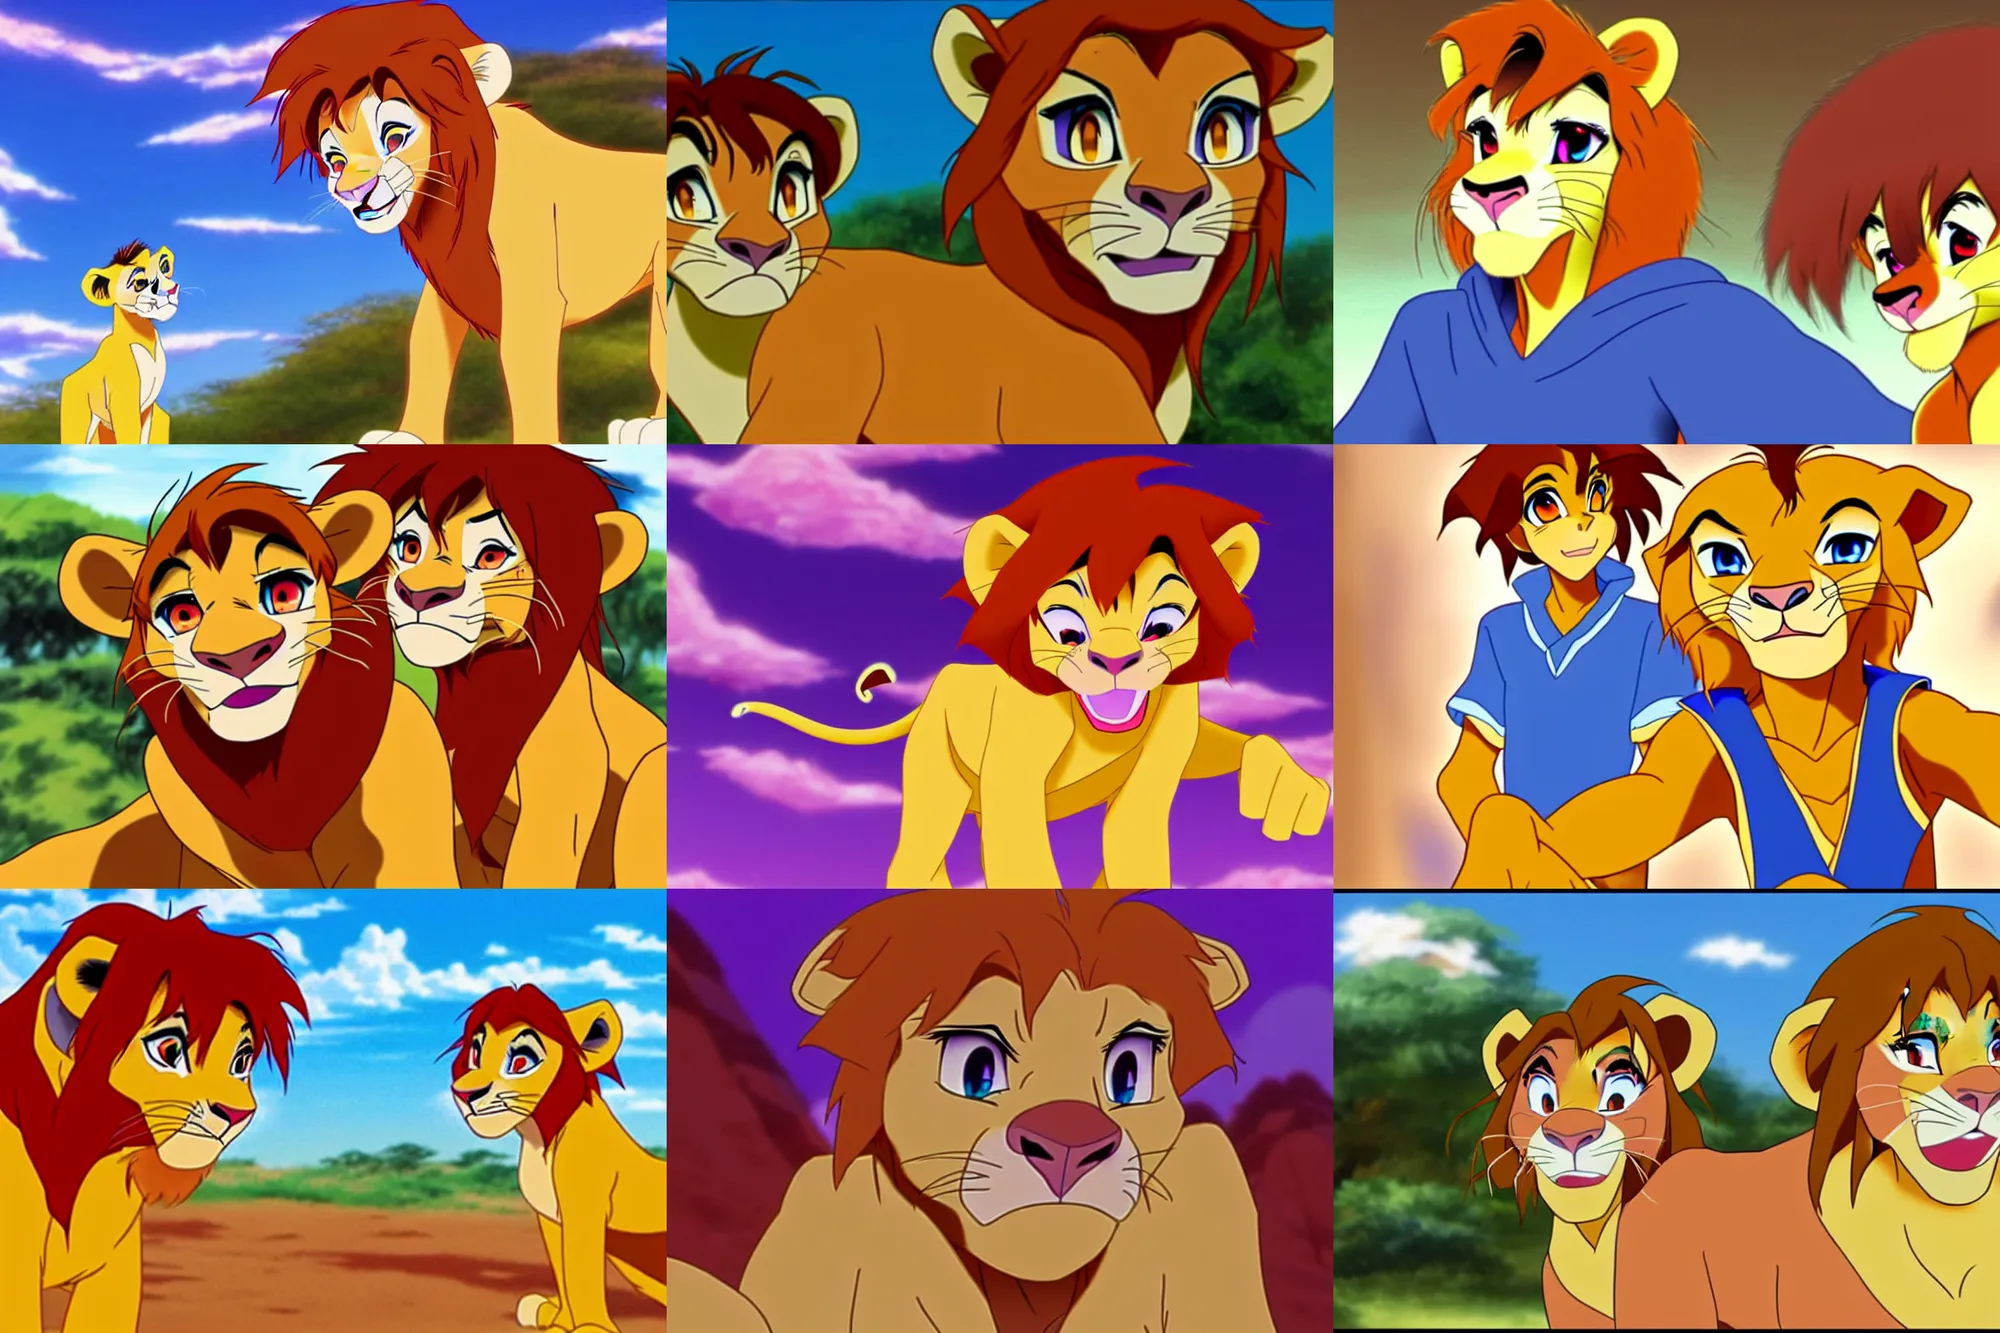 Prompt: simba from the lion king trapped in anime purgatory until he figures it's full of cringe, has a nervous breakdown, and retreats into highschool rp with his tulpas